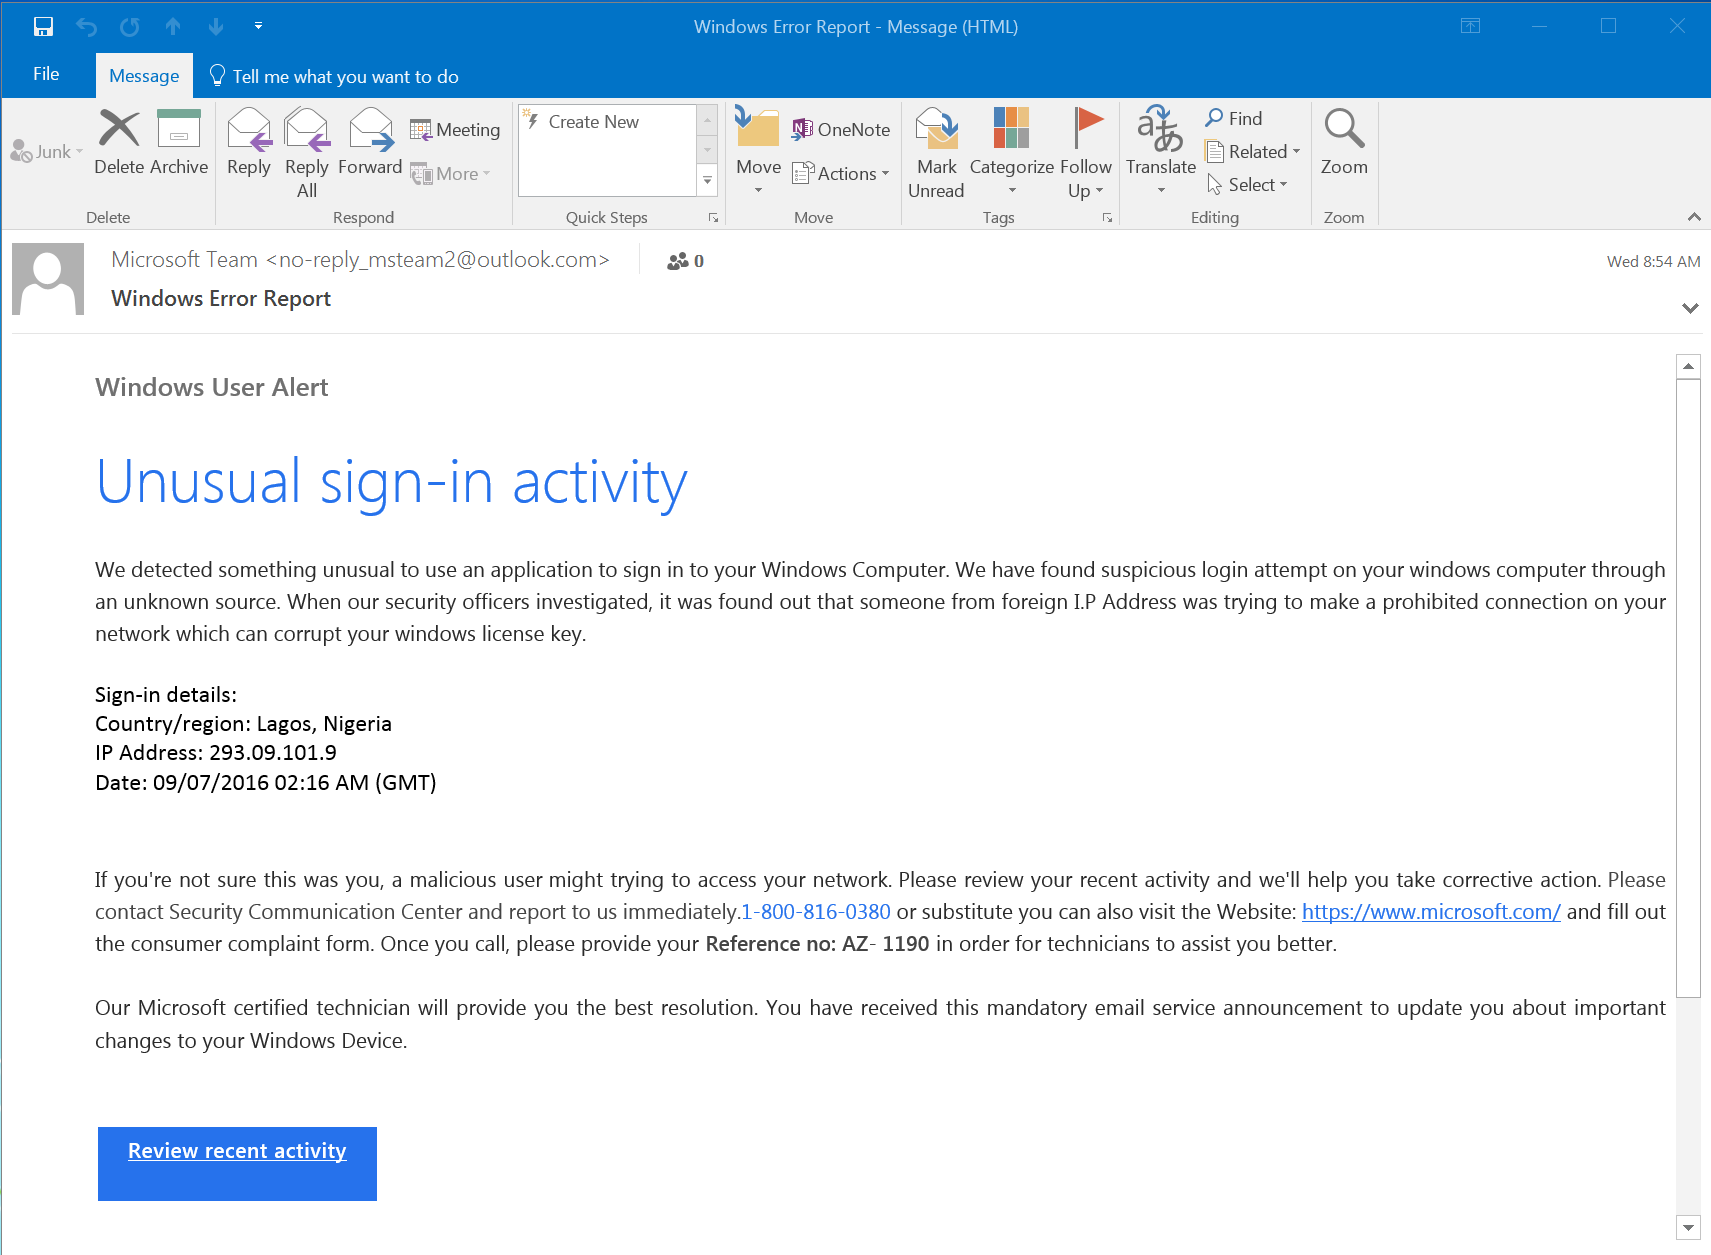 Scam Alert] Fake Microsoft Support Email